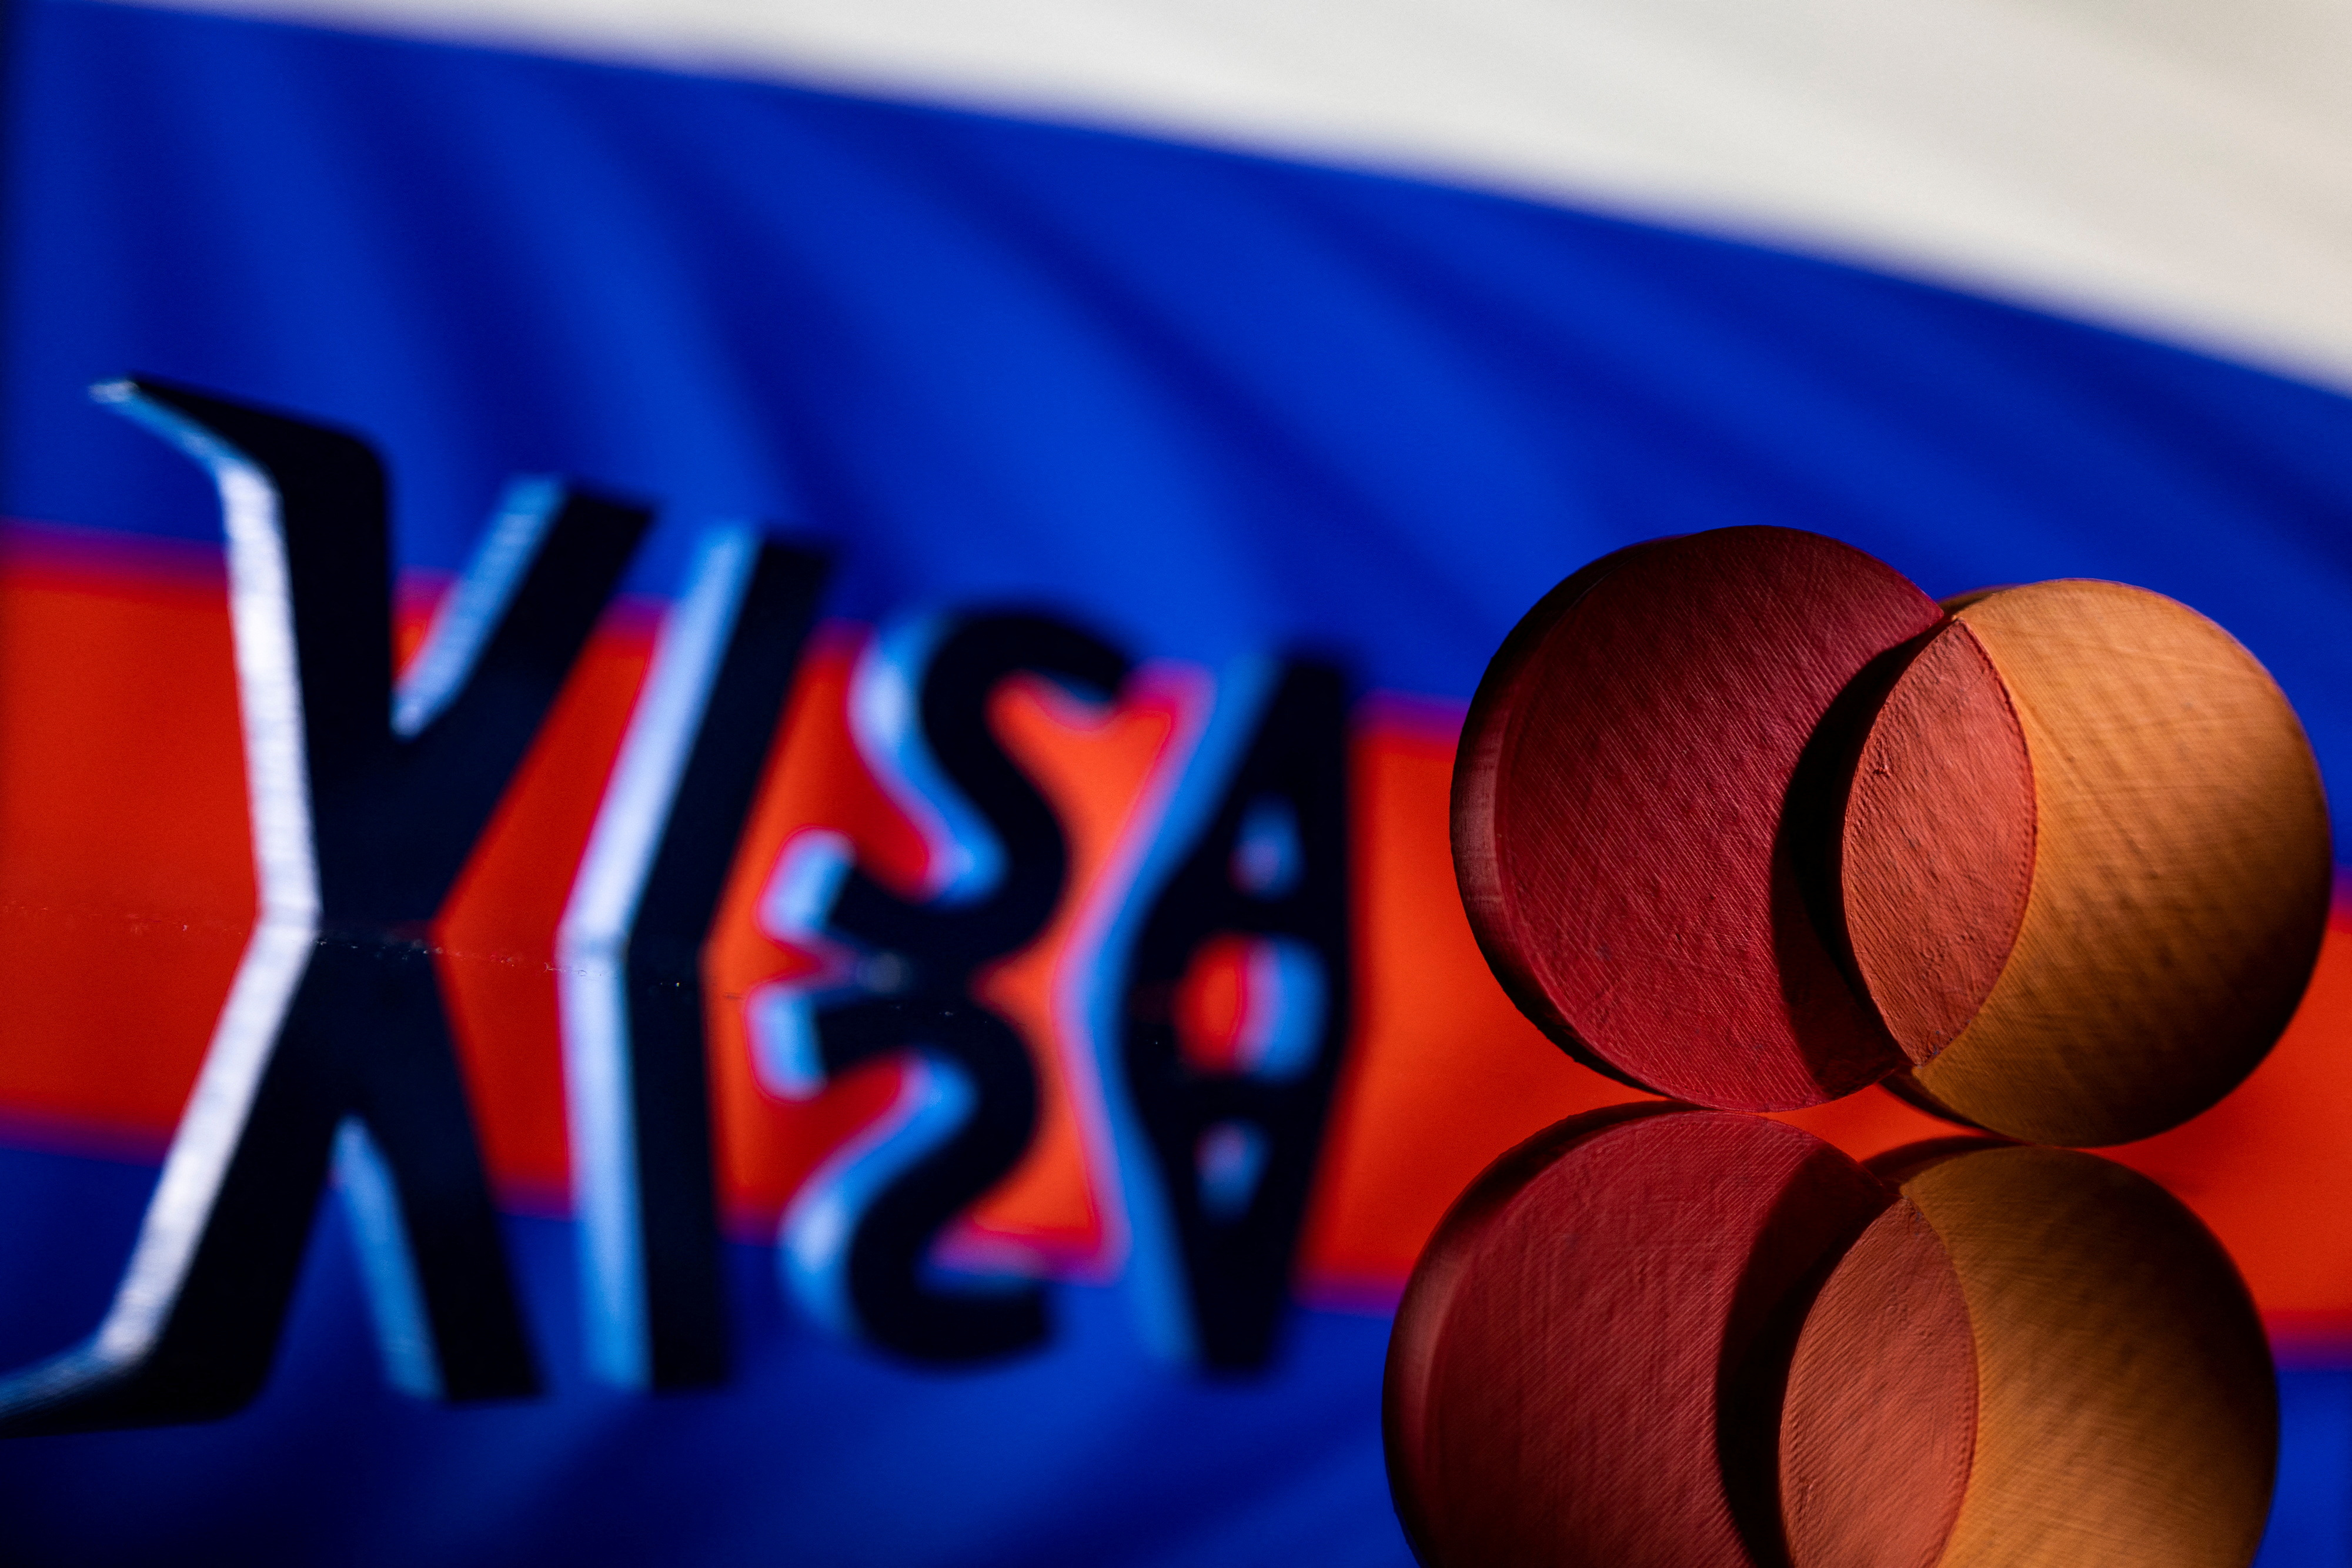 Illustration shows Visa and Mastercard logos in front of Russian flag